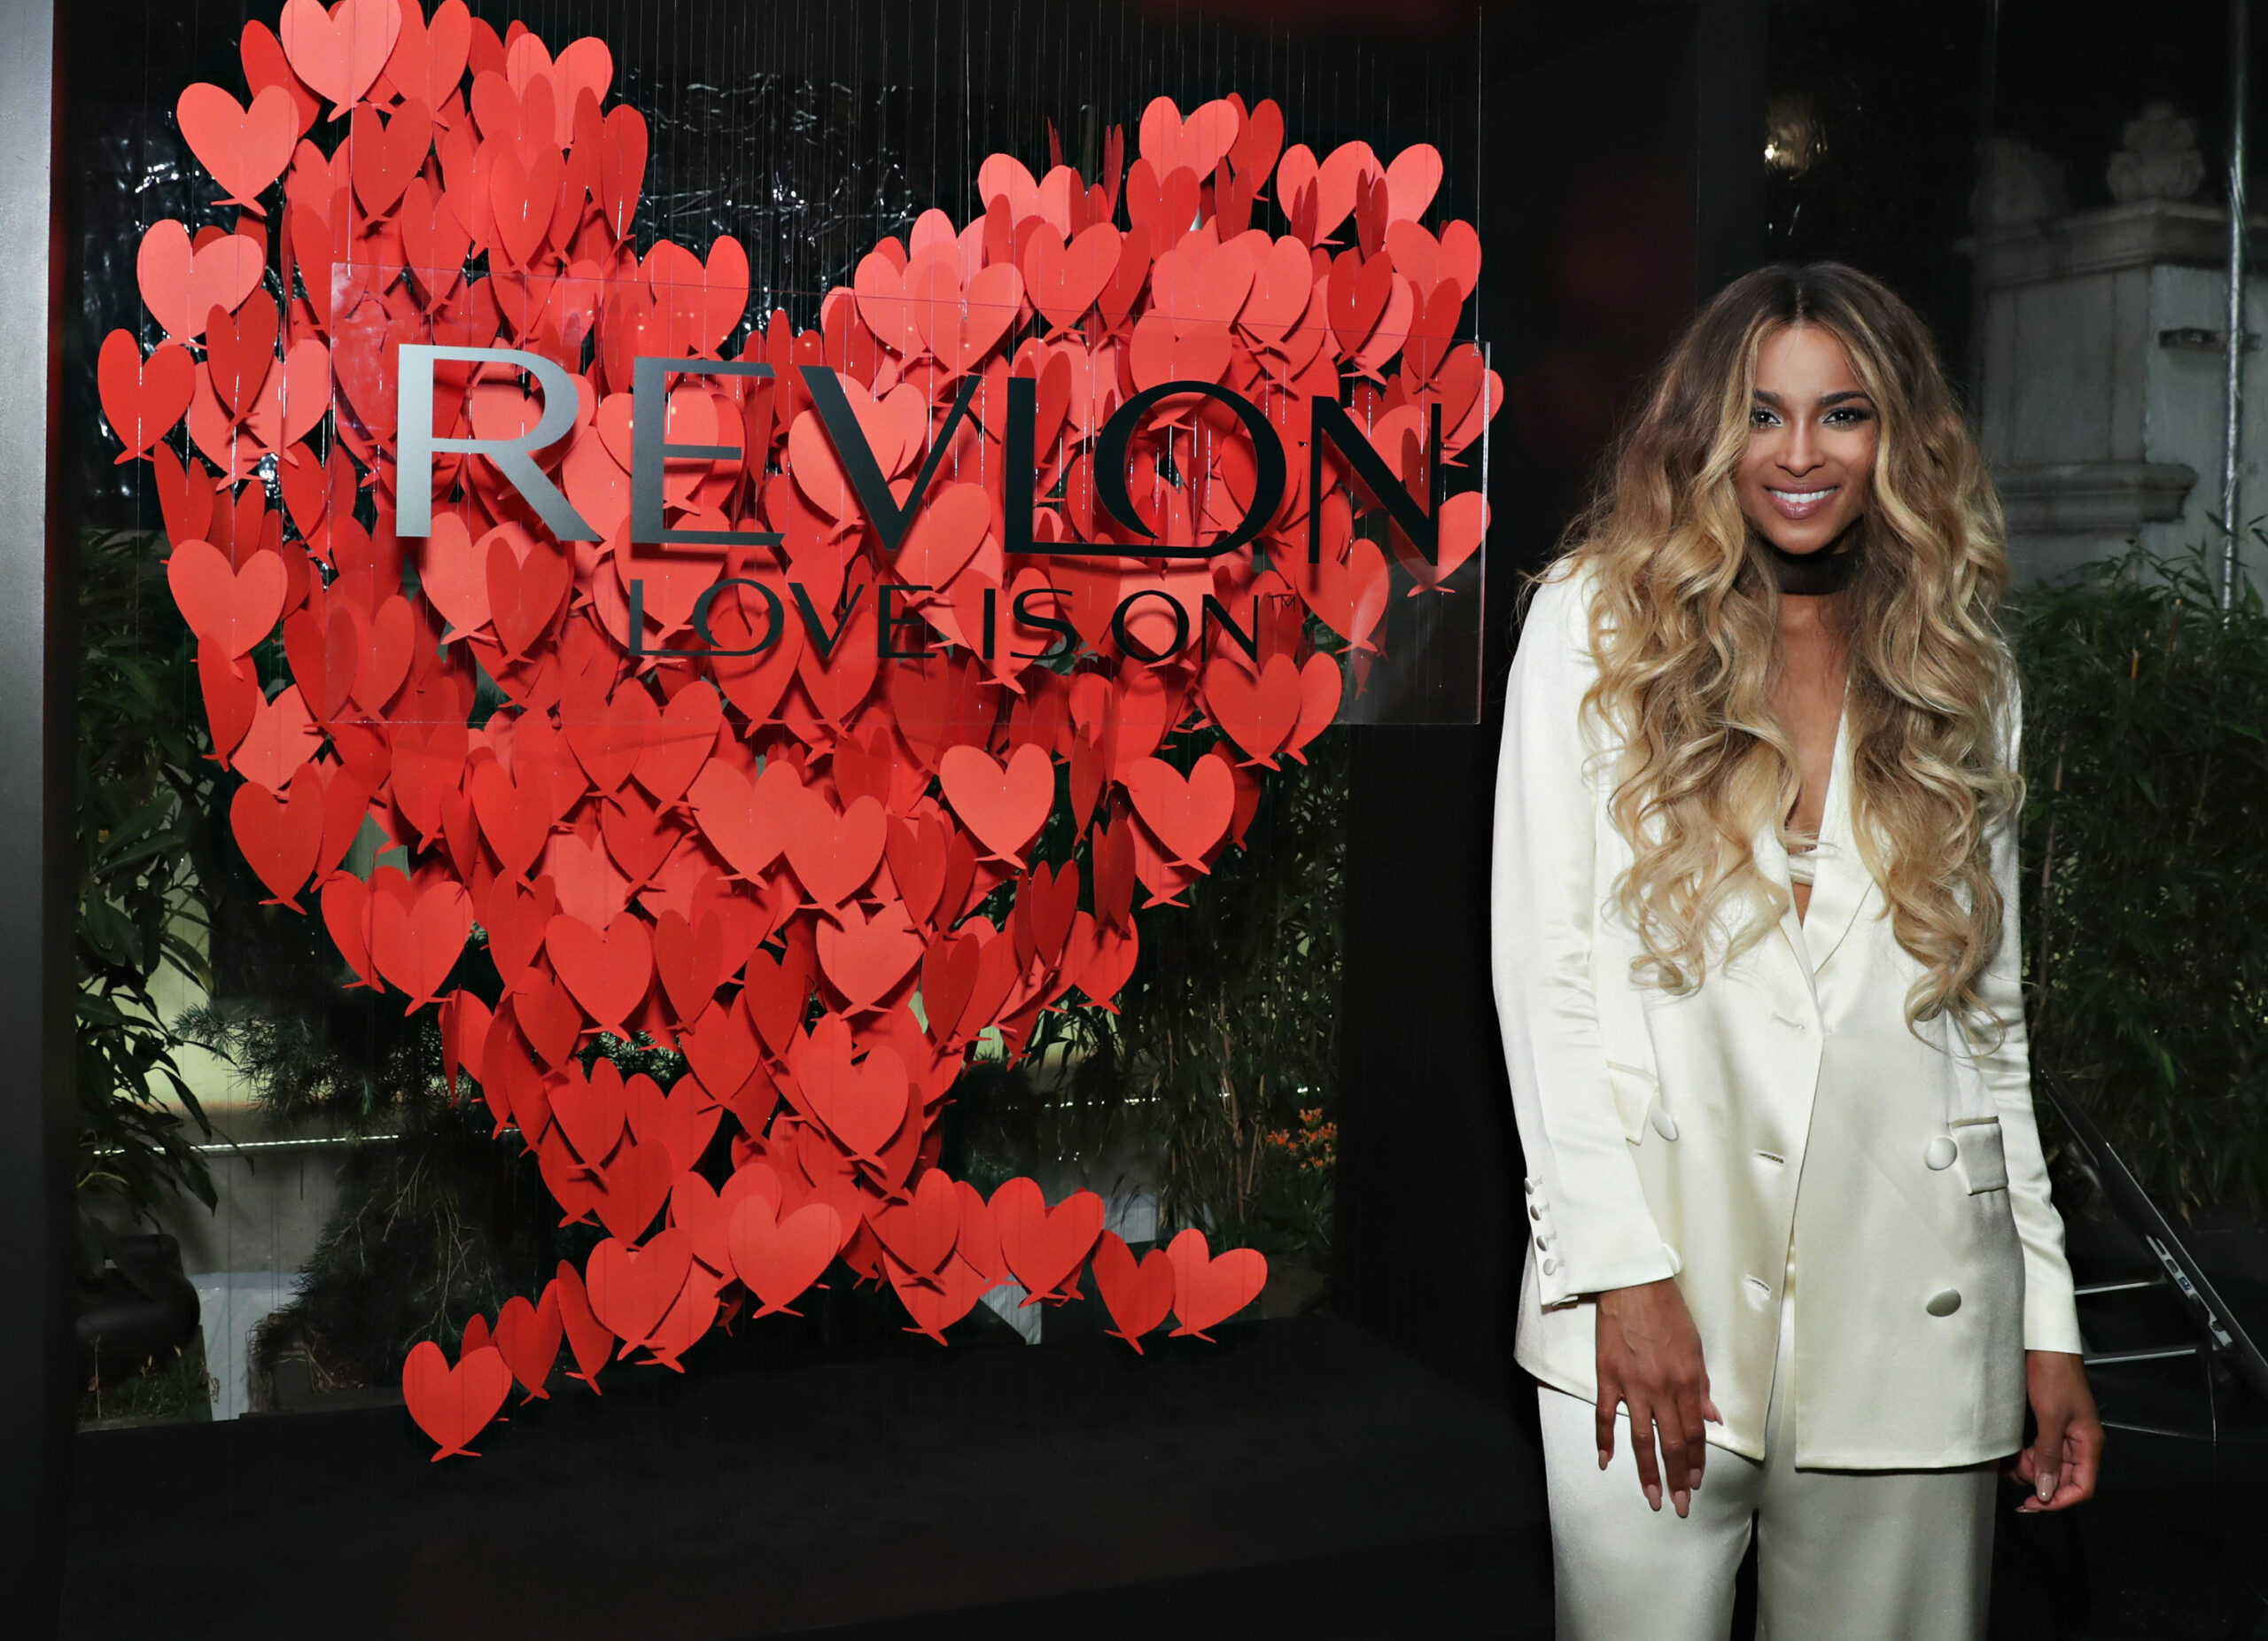 “I’m excited and grateful to join a long line of inspiring brand ambassadors before me and to help Revlon continue to encourage women to Choose Love,” commented Ciara 